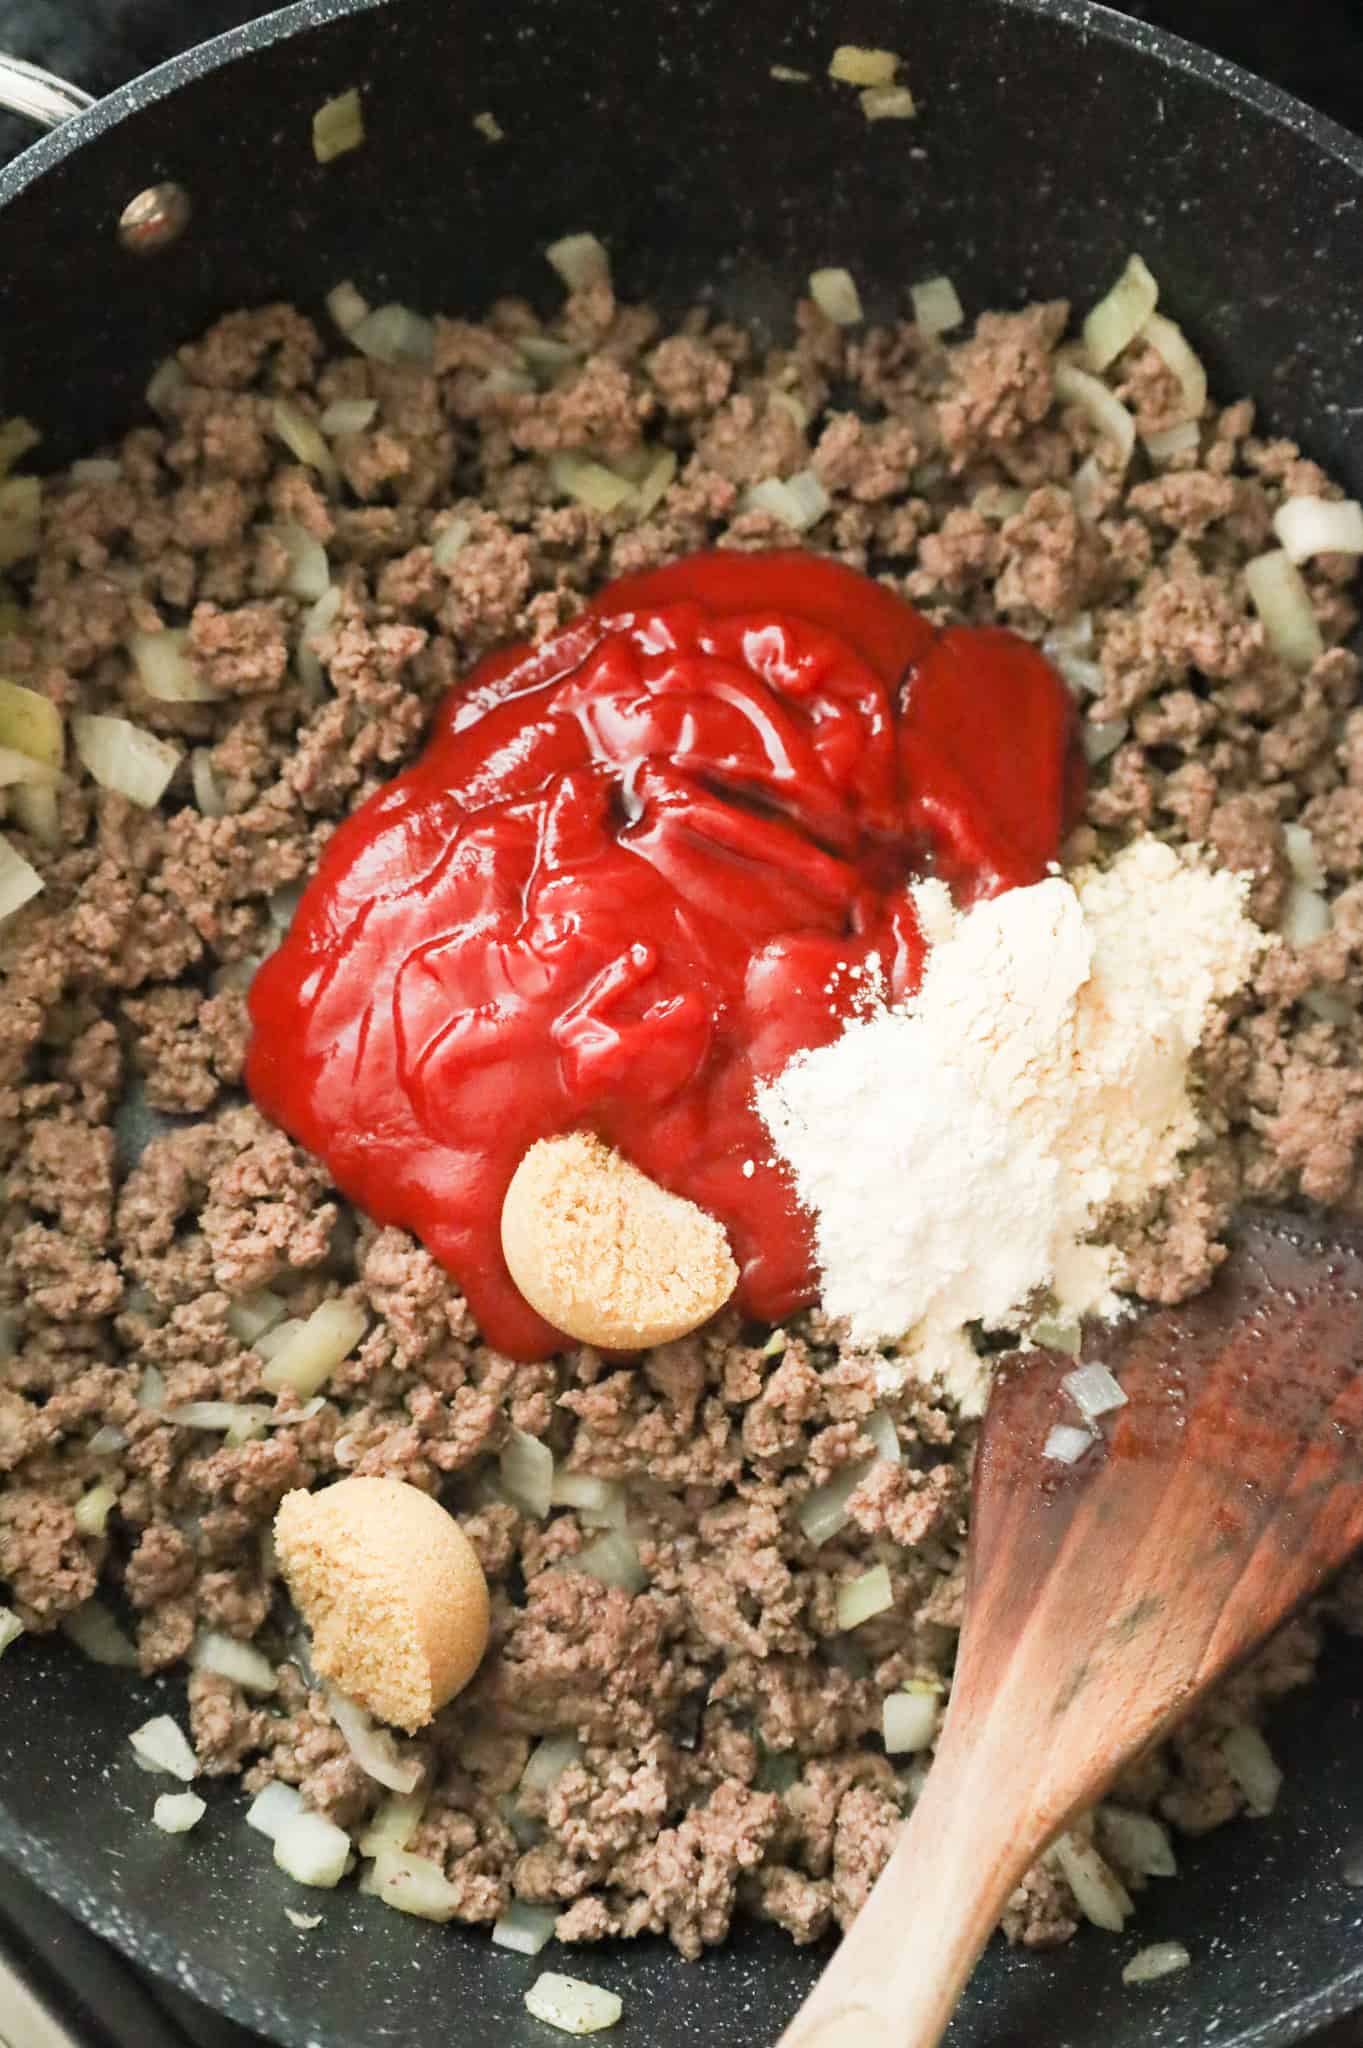 ketchup, Worcestershire sauce, brown sugar, onion powder and garlic powder on top of cooked ground beef in a skillet